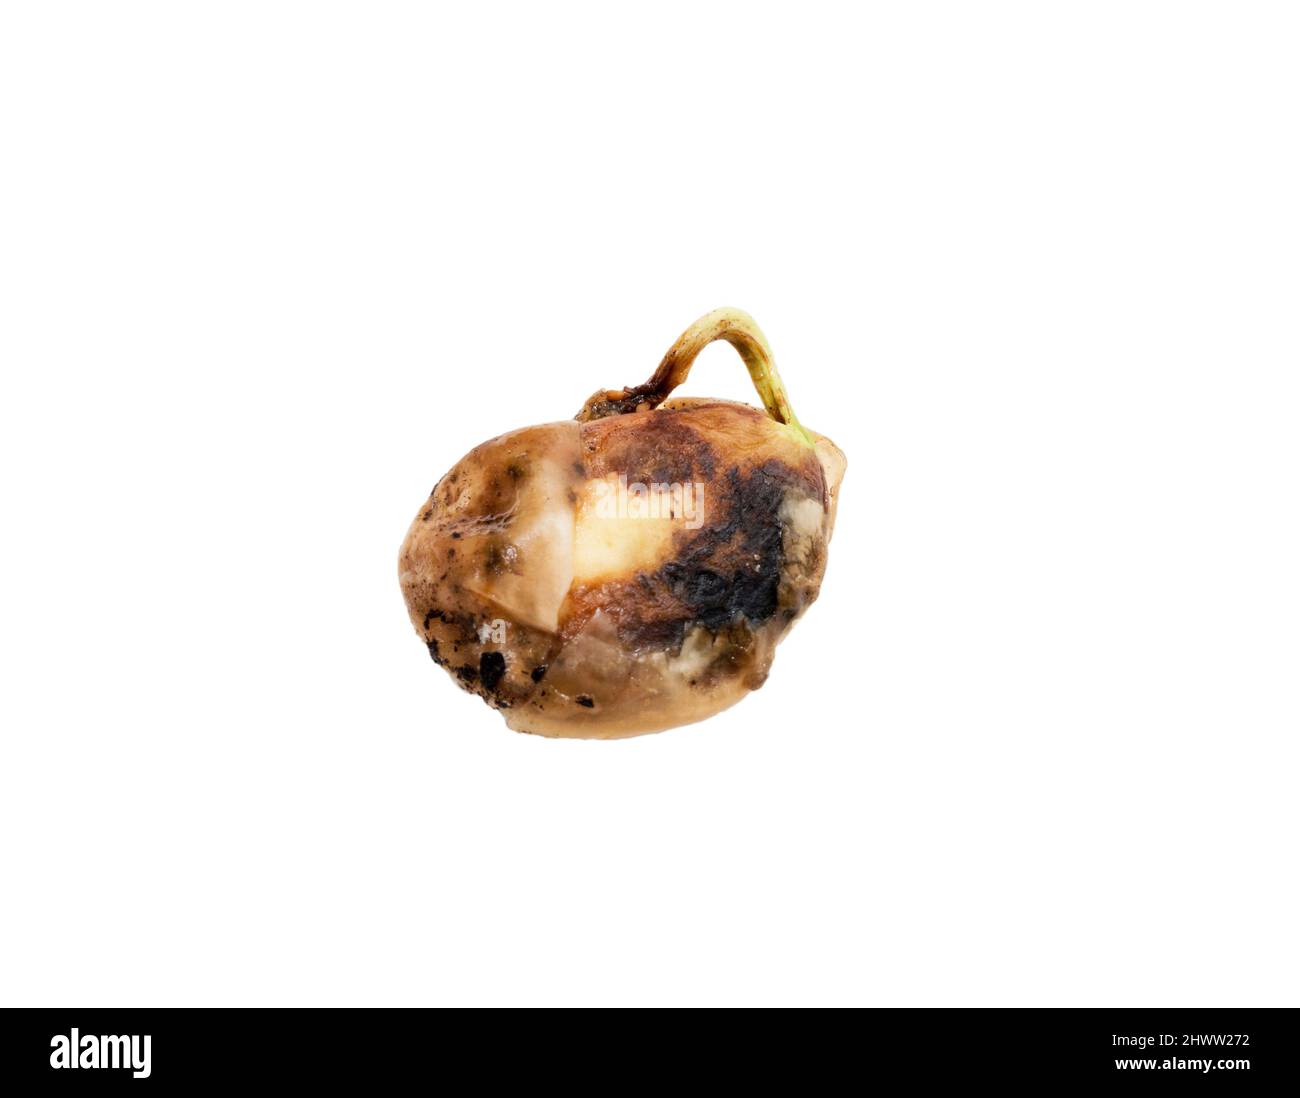 Horizontal shot of a lima bean seed sprout gone bad or rotten isolate on white with copy space. Stock Photo